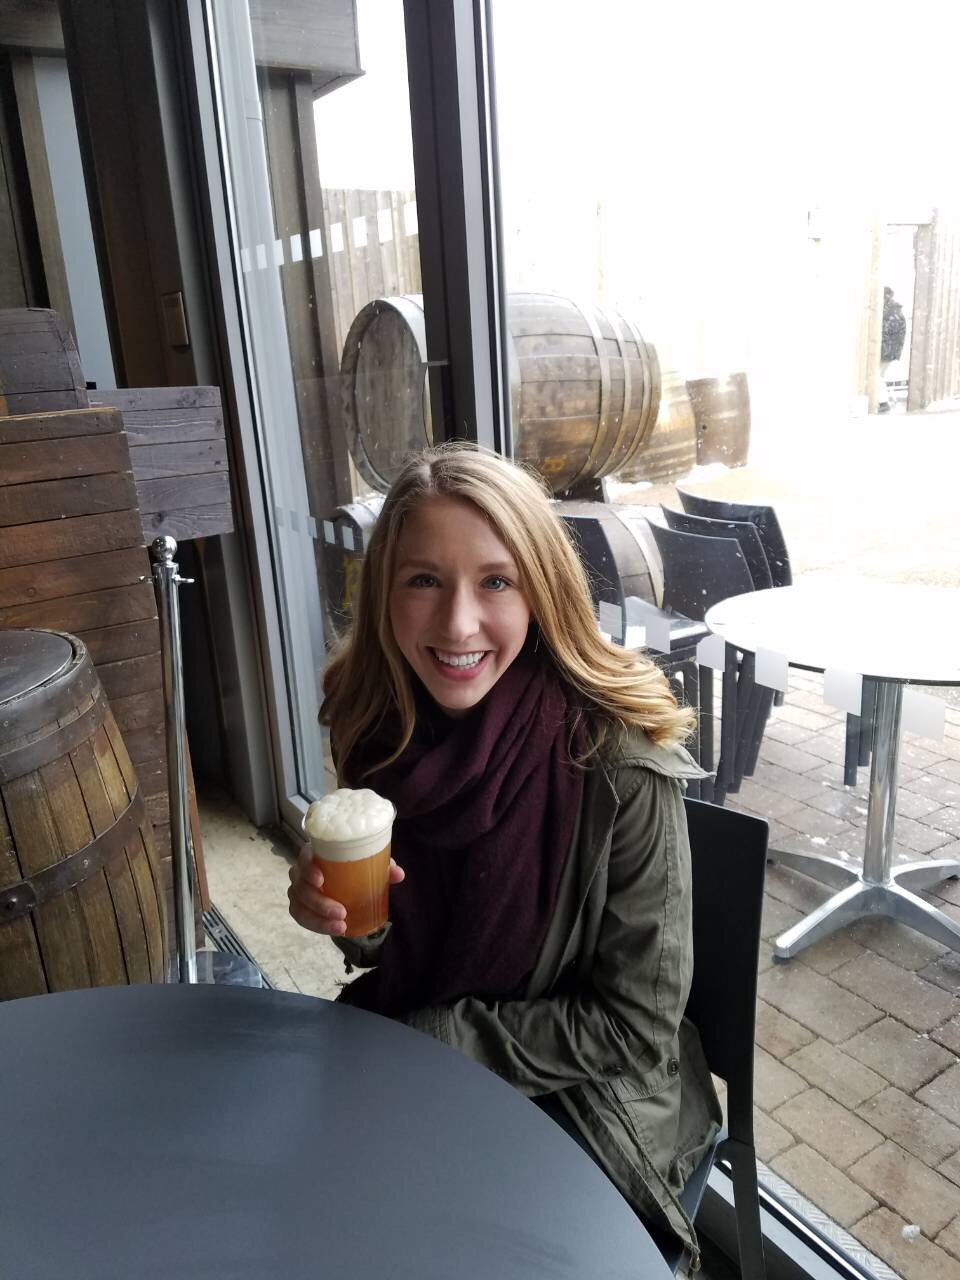 Drinking a butterbeer at the Harry Potter Studio Tour in London 